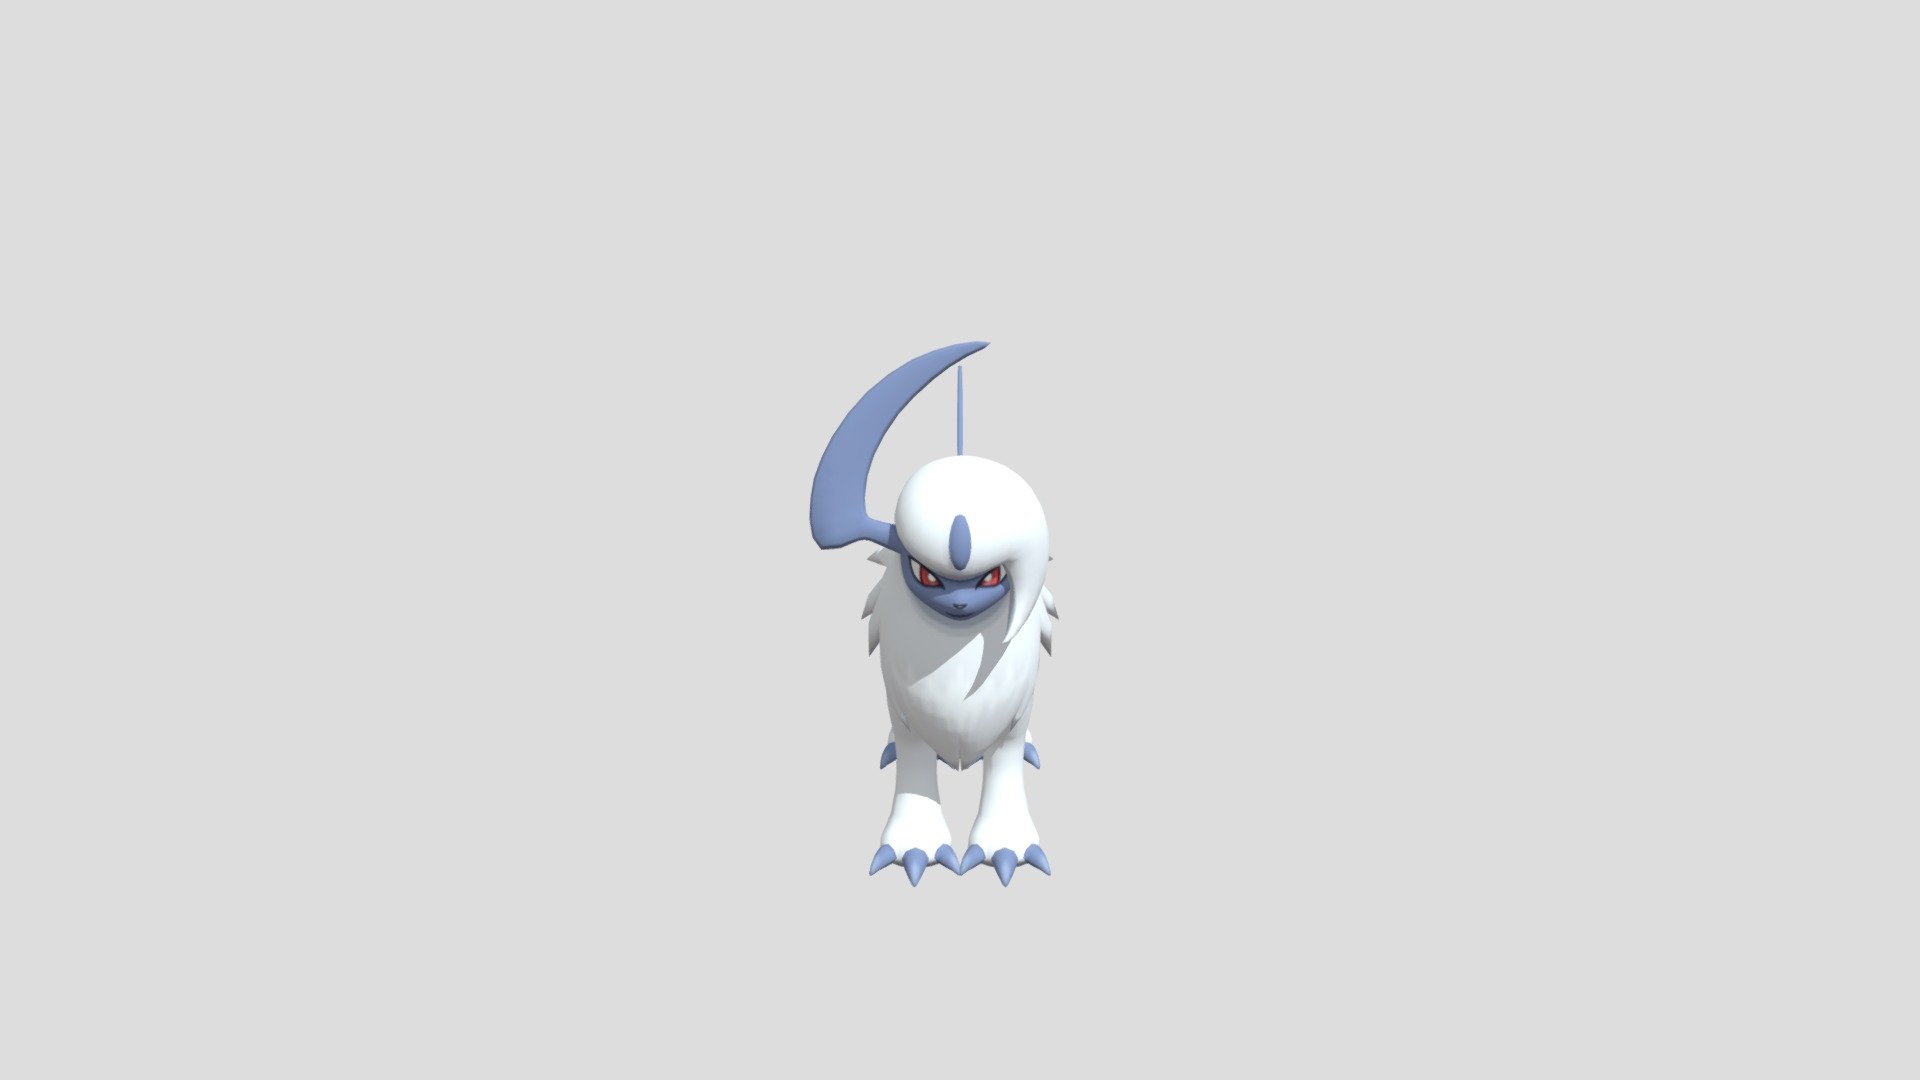 Disaster Pokémon
Every time Absol appears before people, it is followed by a disaster such as an earthquake or a tidal wave. As a result, it came to be known as the disaster Pokémon 3d model